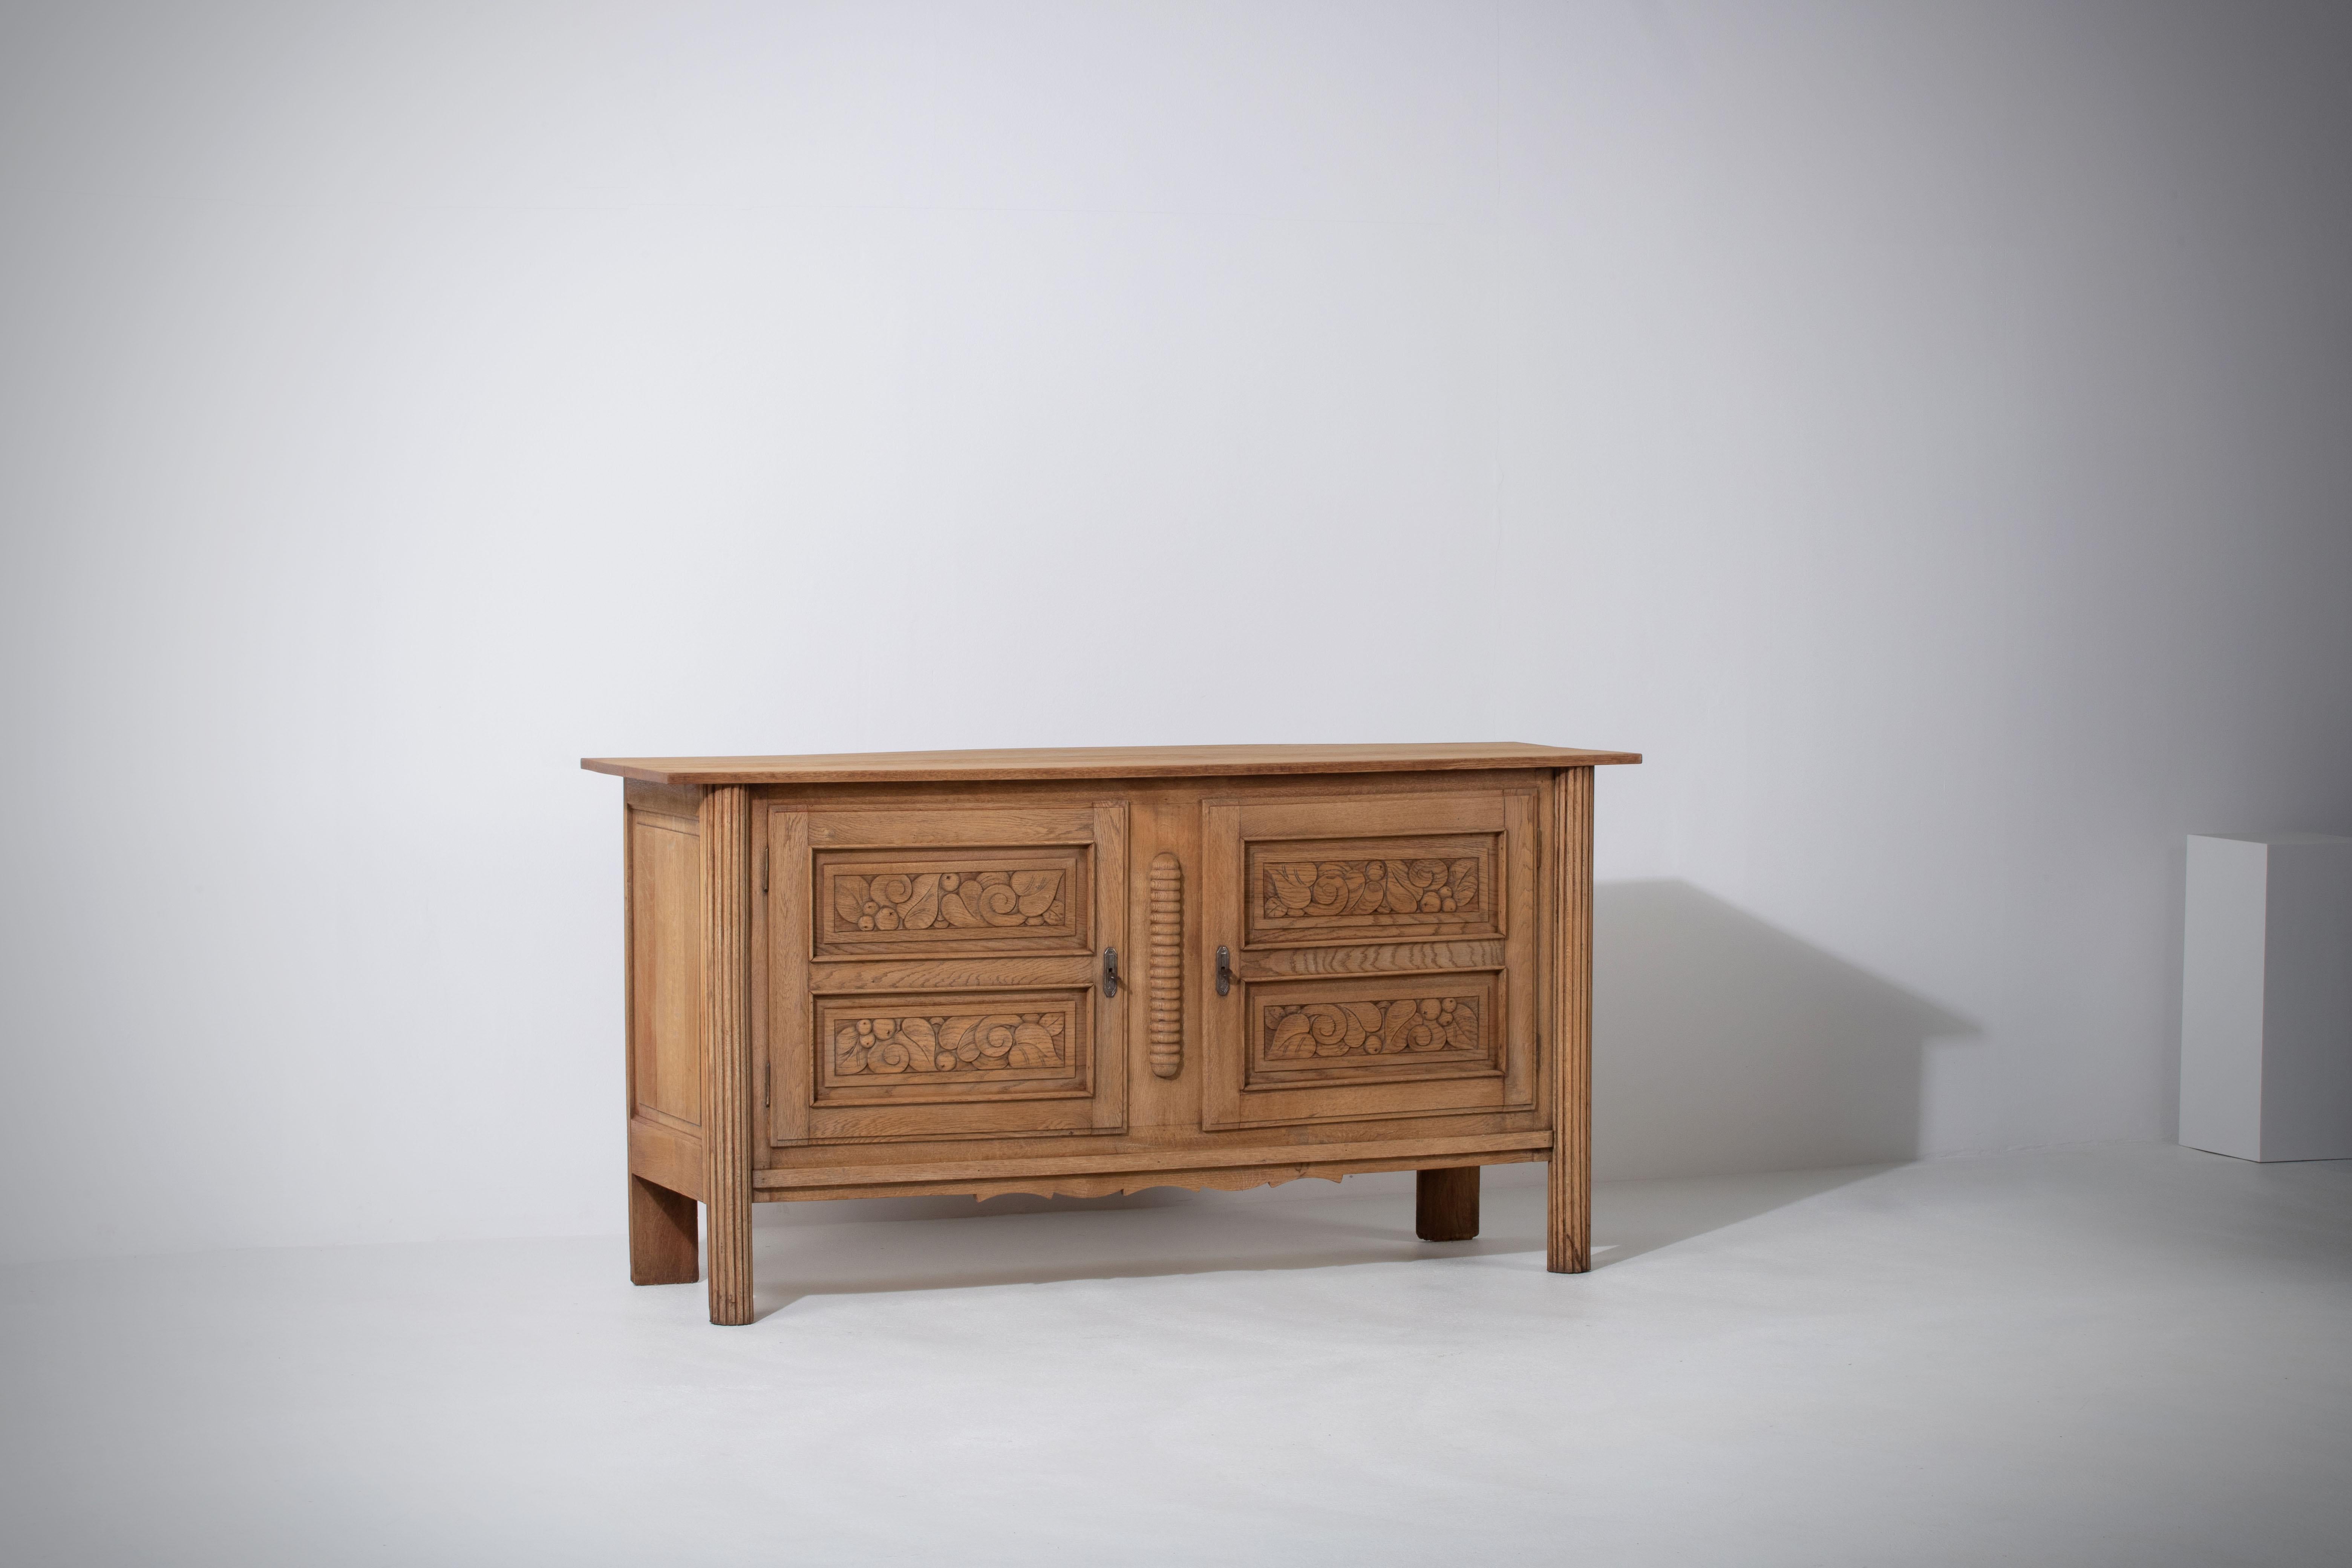 Elegant 1950s Oak Sideboard with Carved Floral Motifs - A Timeless Treasure Discovered in Bordeaux's Vineyards.

Introducing a stunning oak sideboard from the 1950s, gracing any interior with its elegant and versatile design. This charming piece